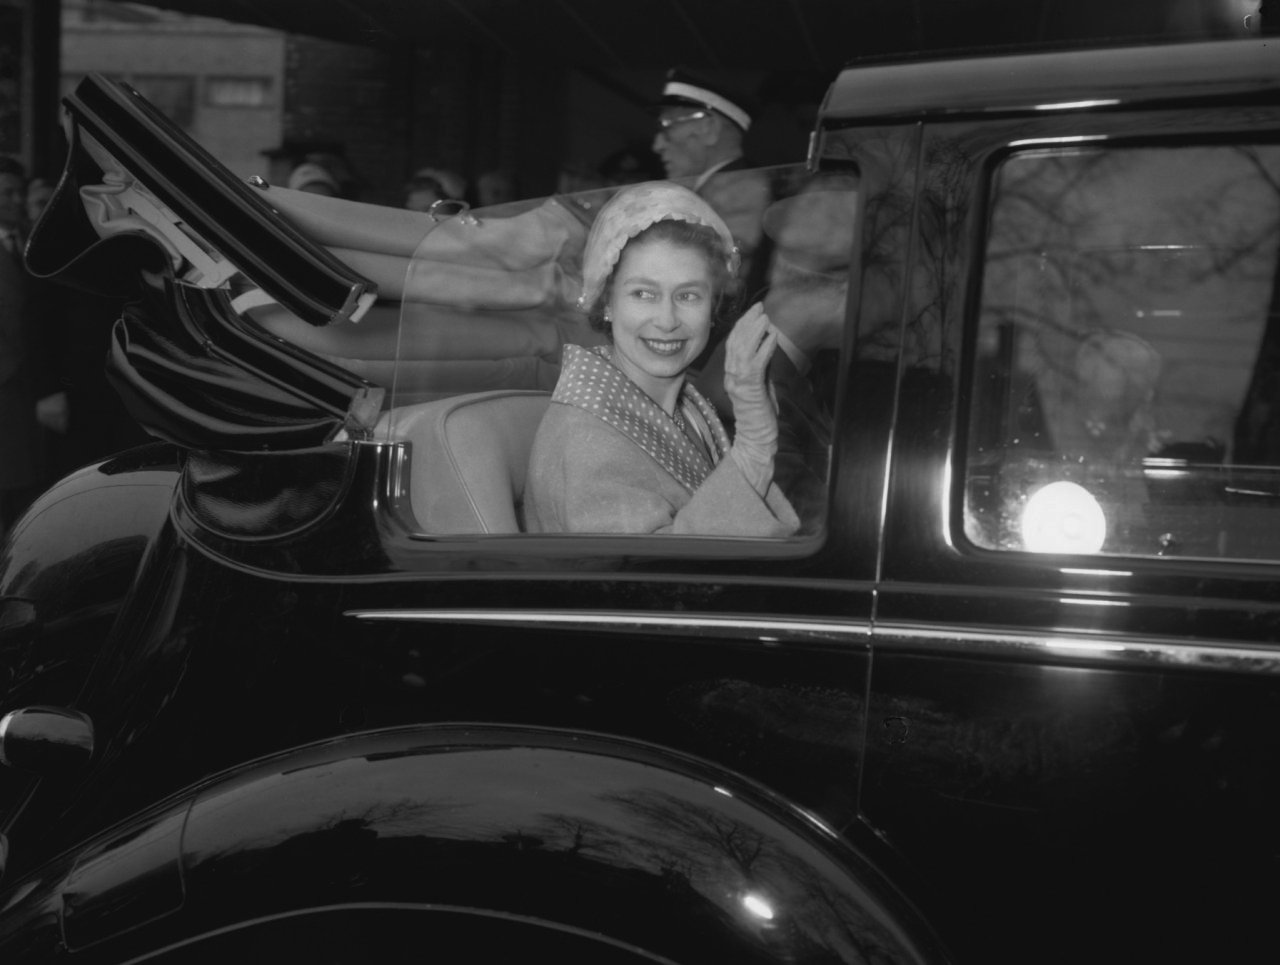  The Crown season 2 royals - 1958 picture of The Queen leaving a Dutch museum in 1958